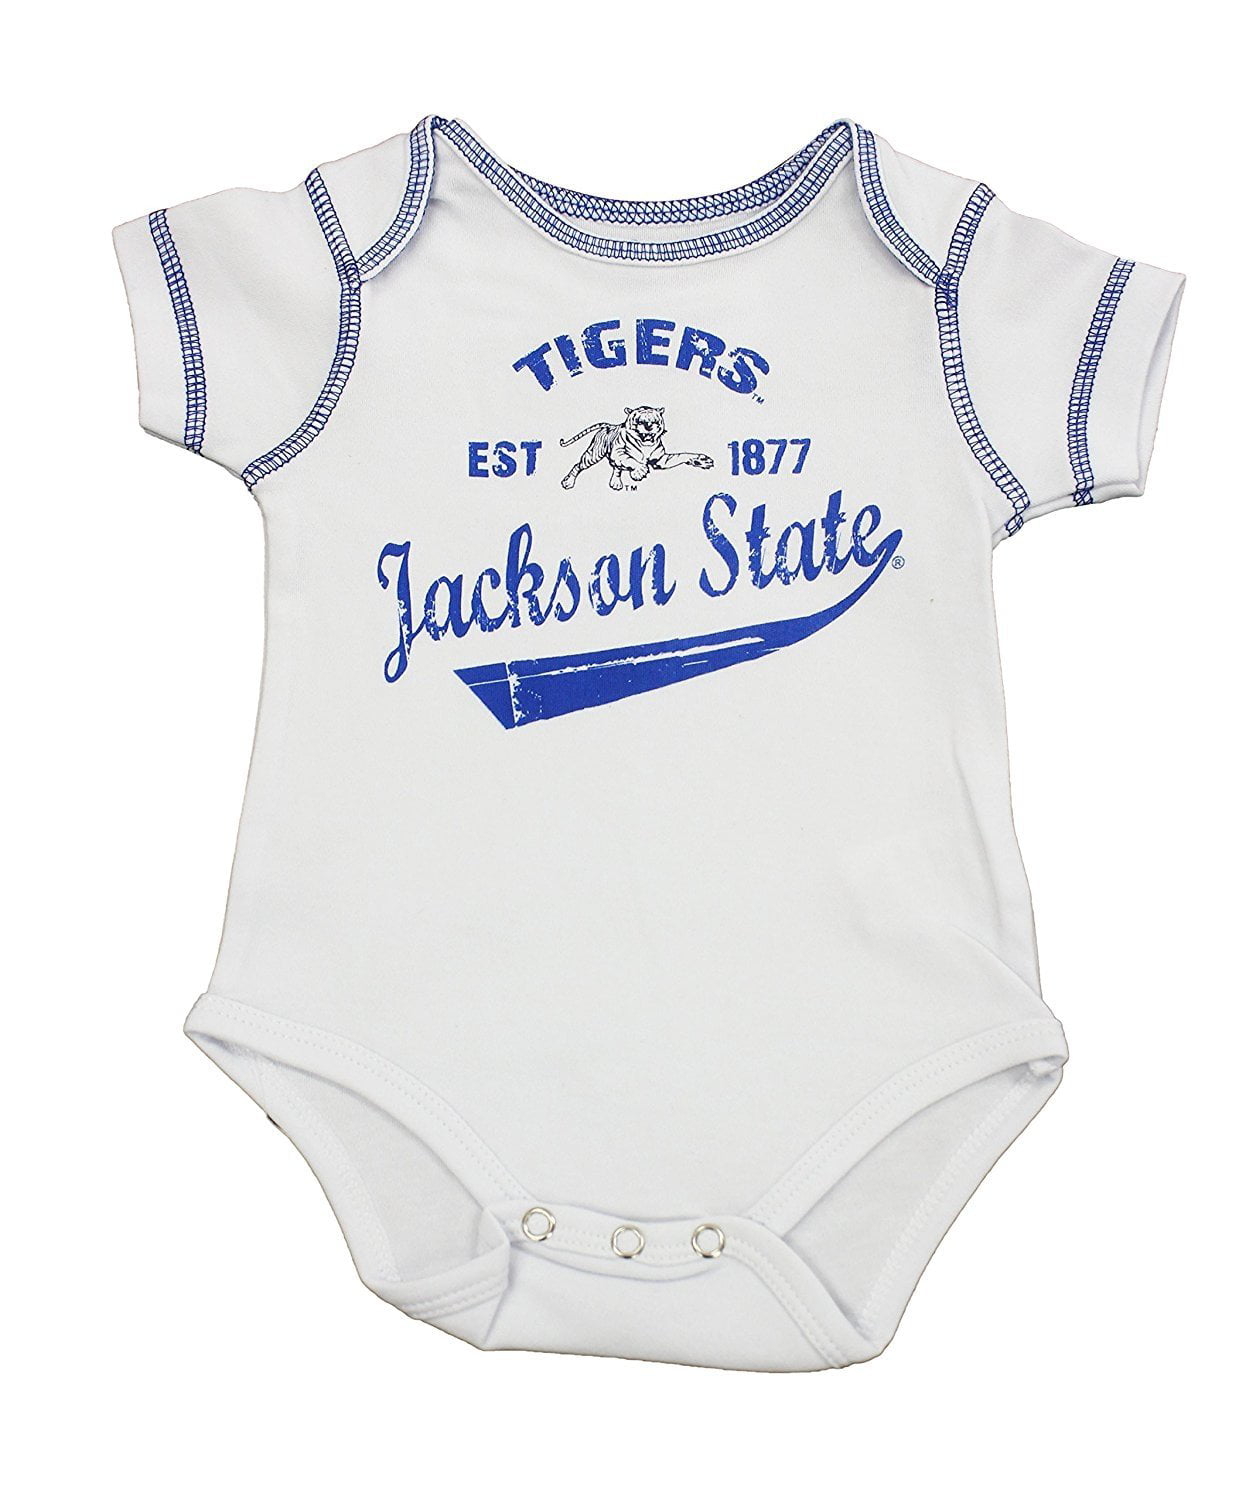 Outerstuff Baby Jackson State Tigers Paws Football Rookie 3 Piece Creeper Set